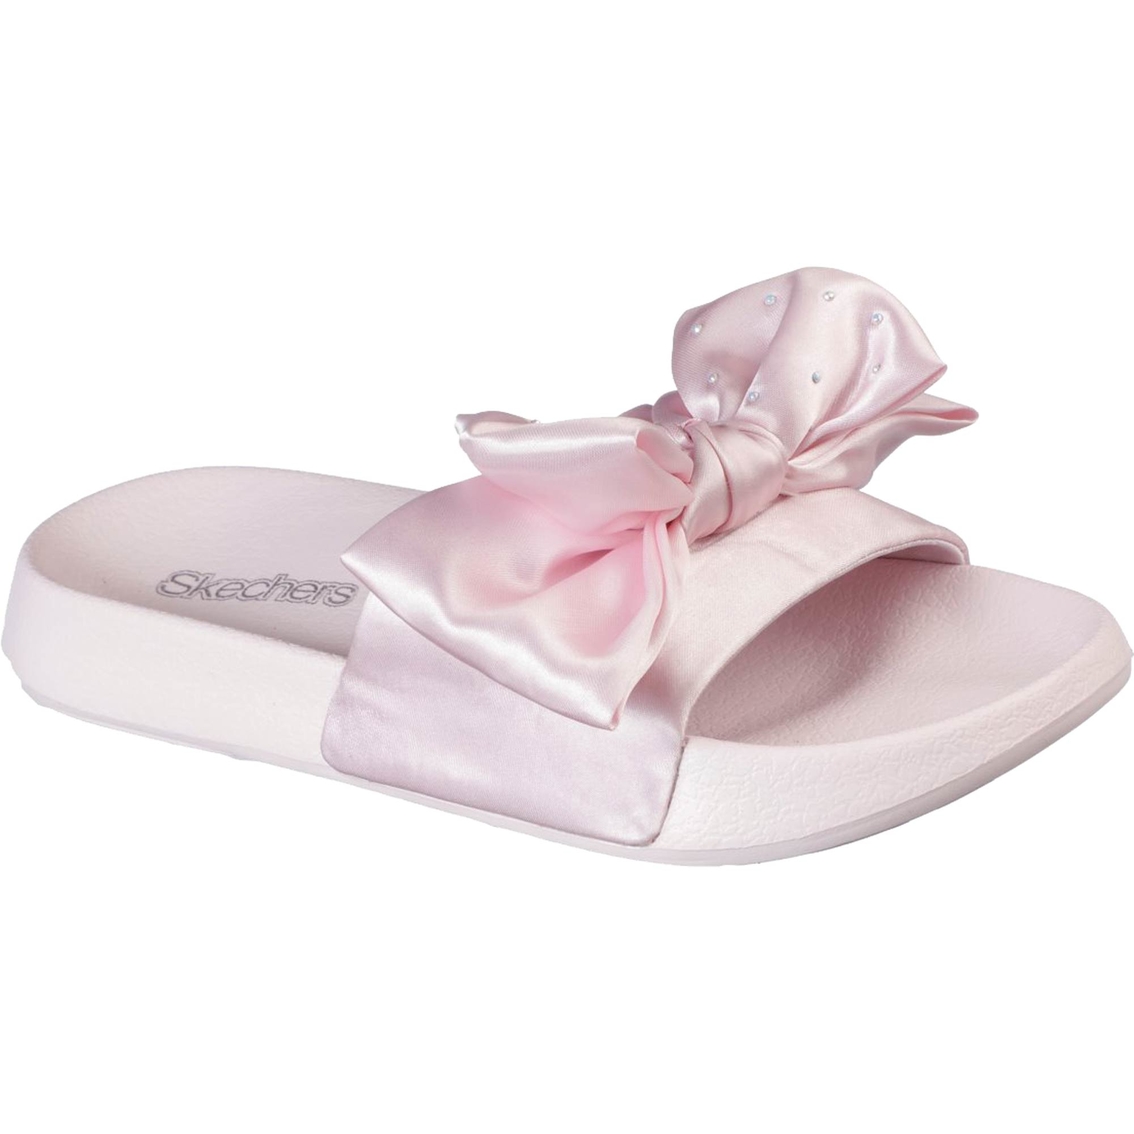 skechers pink bow shoes